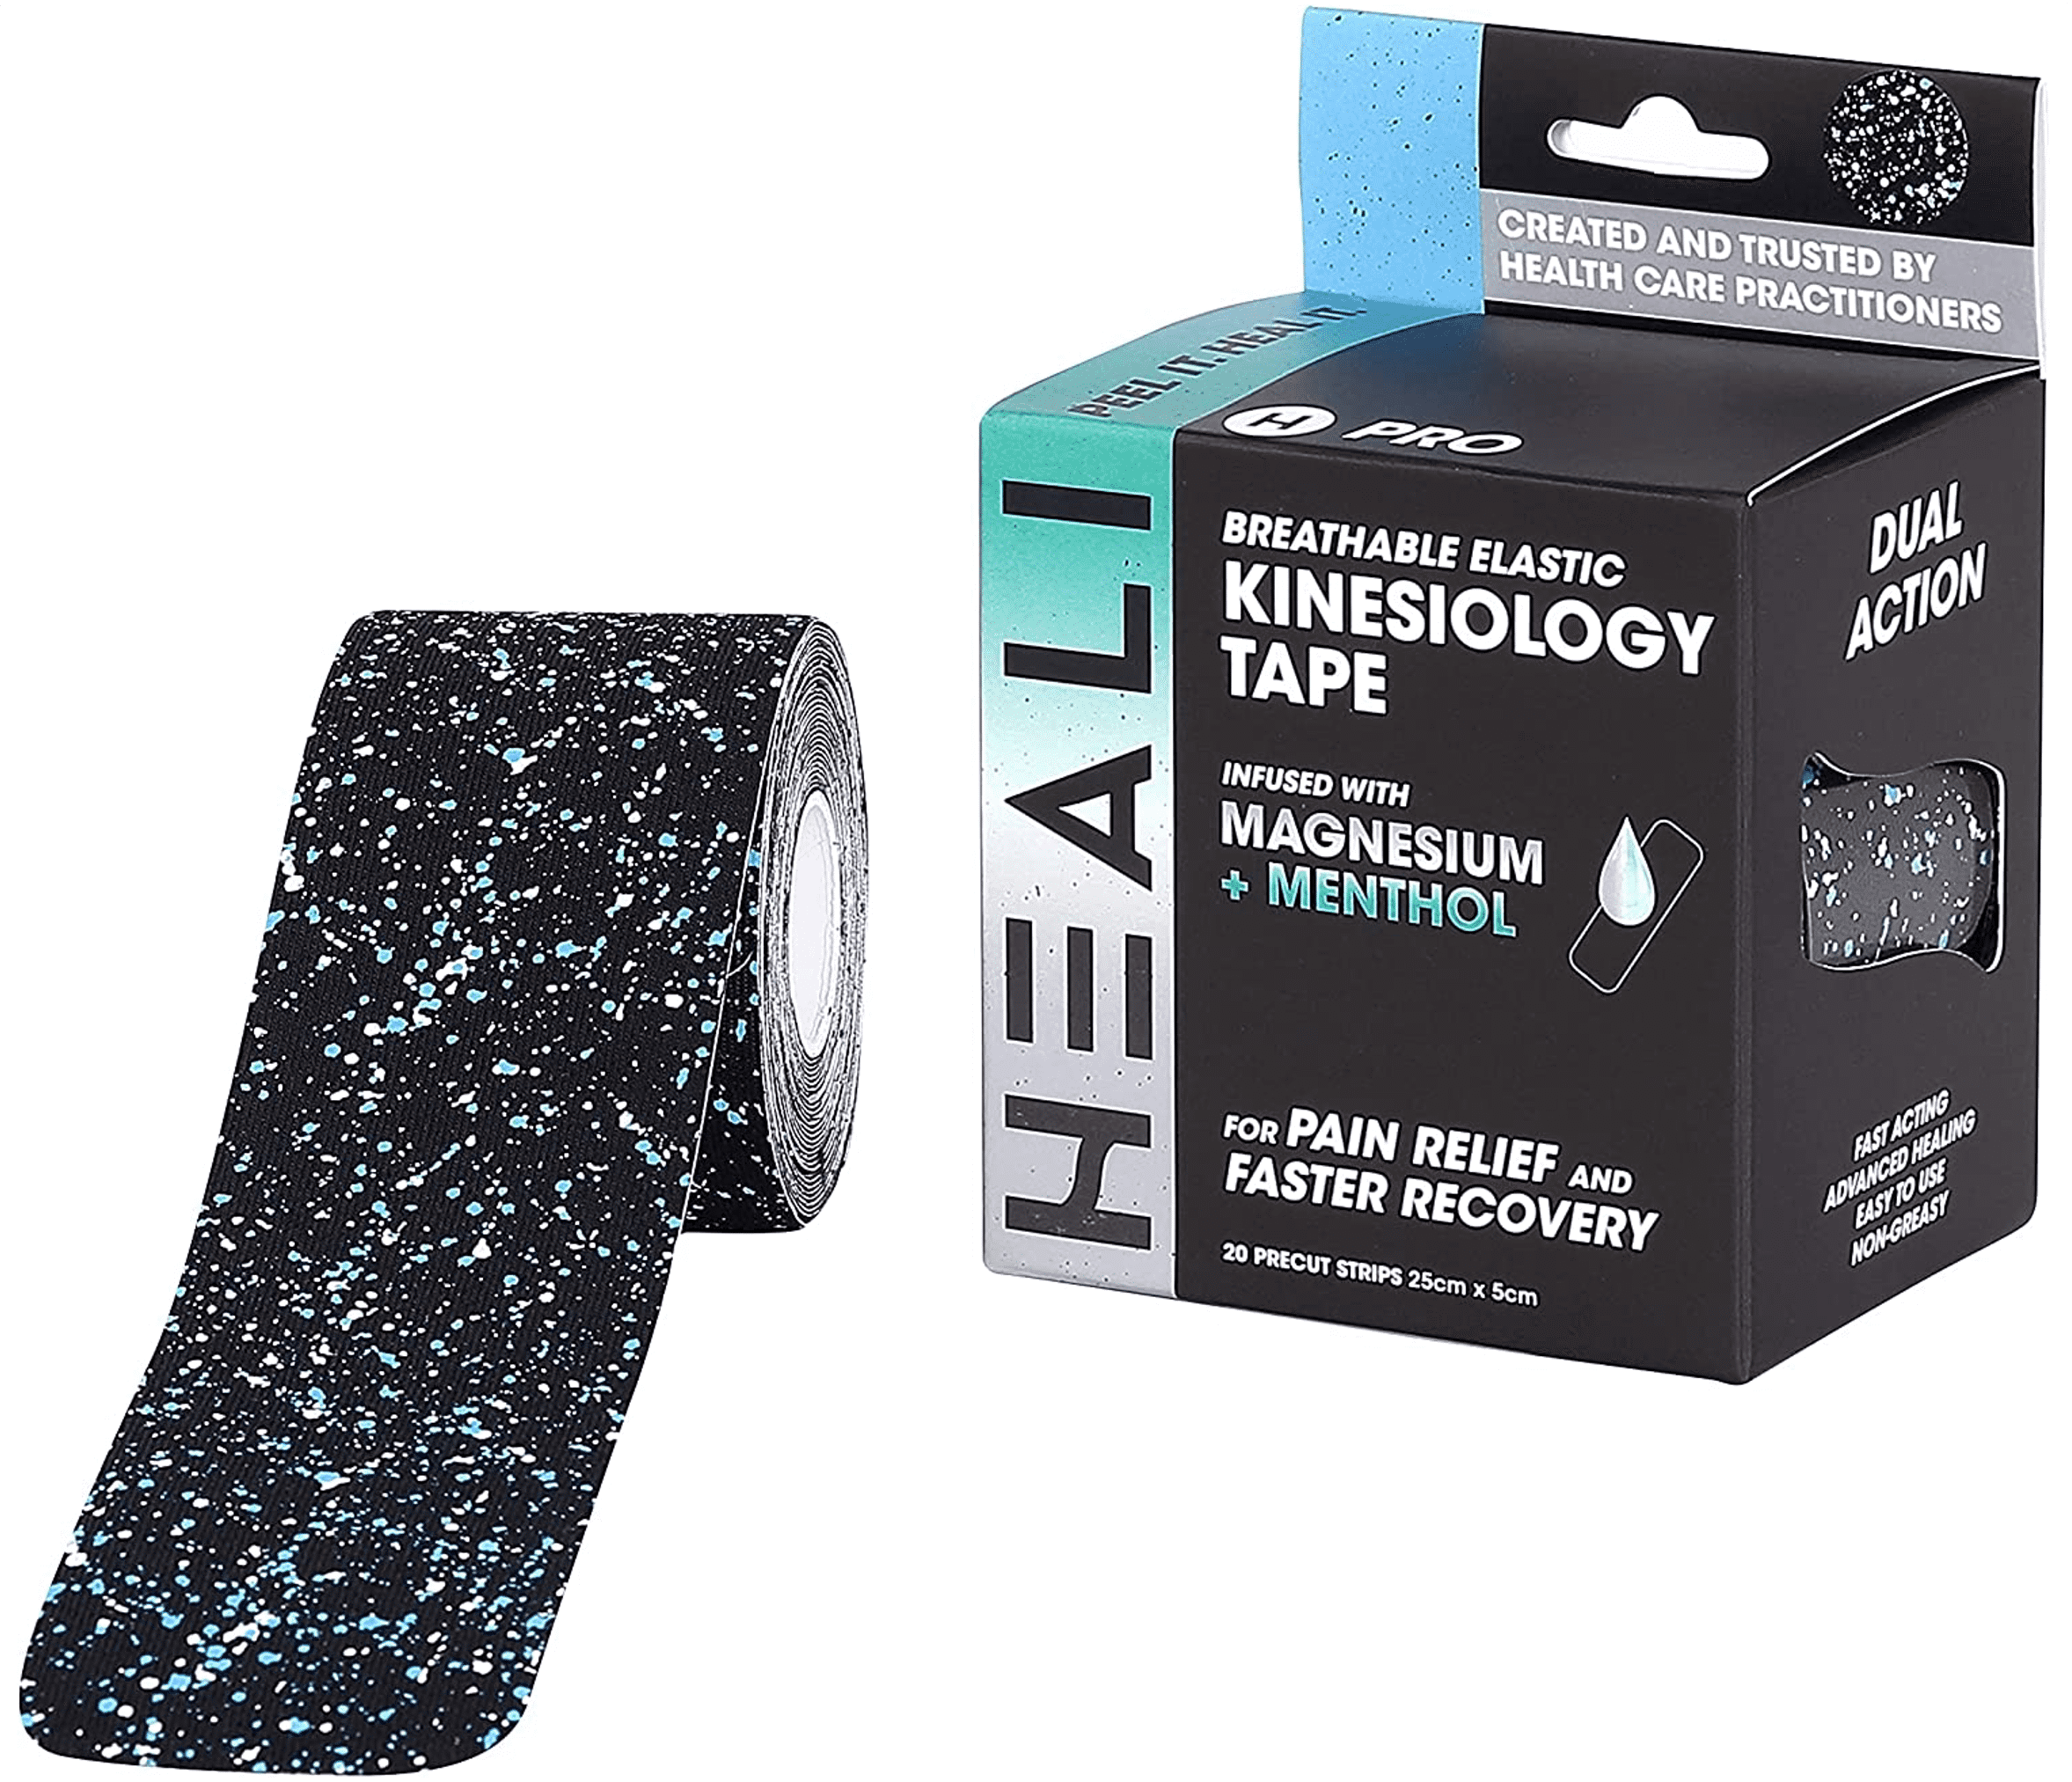 Heali Precut Kinesiology Tape Infused with Magnesium & Menthol - Roll - 20  Strips - 2 x 10 (5cm x 25cm) - Synthetic Silk, Latex Free, Strong  Adhesive to Last 4-7 Days - Blue Splatter 